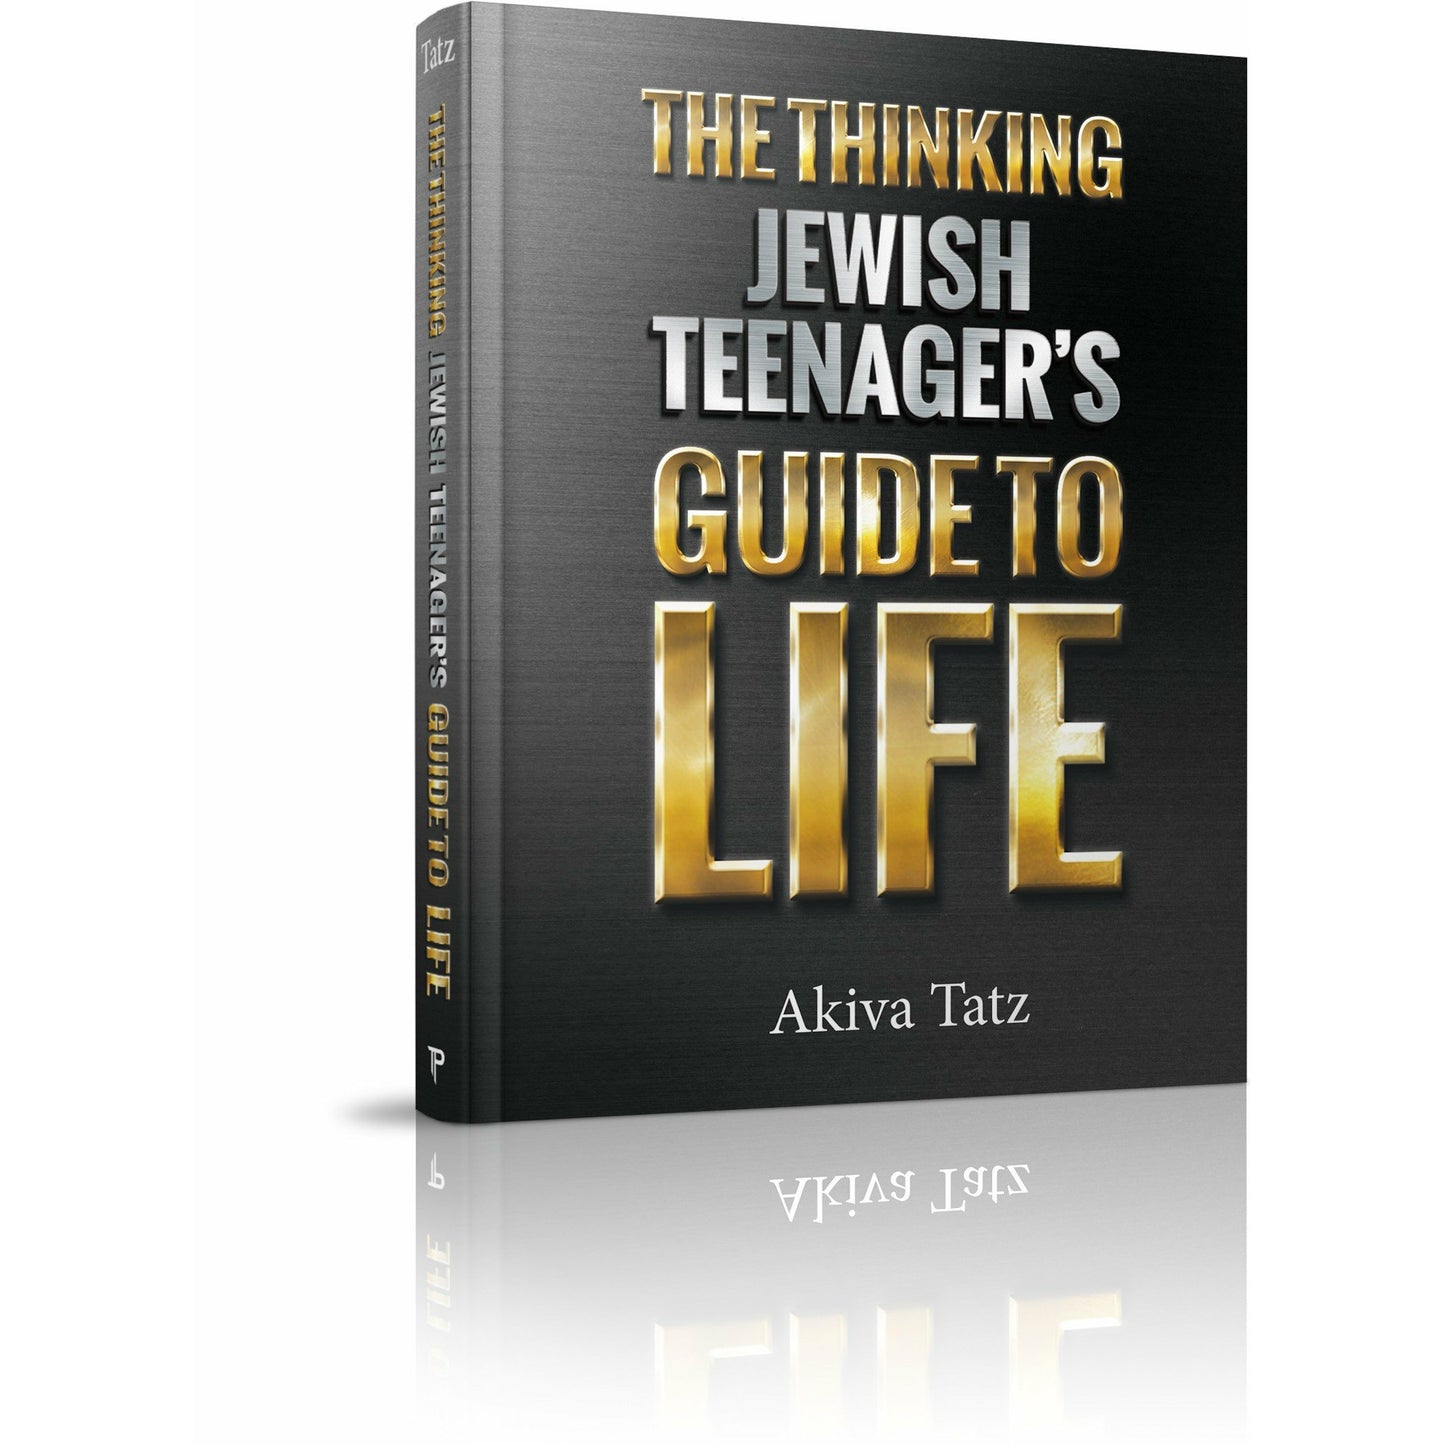 The Thinking Jewish Teenager's Guide To Life